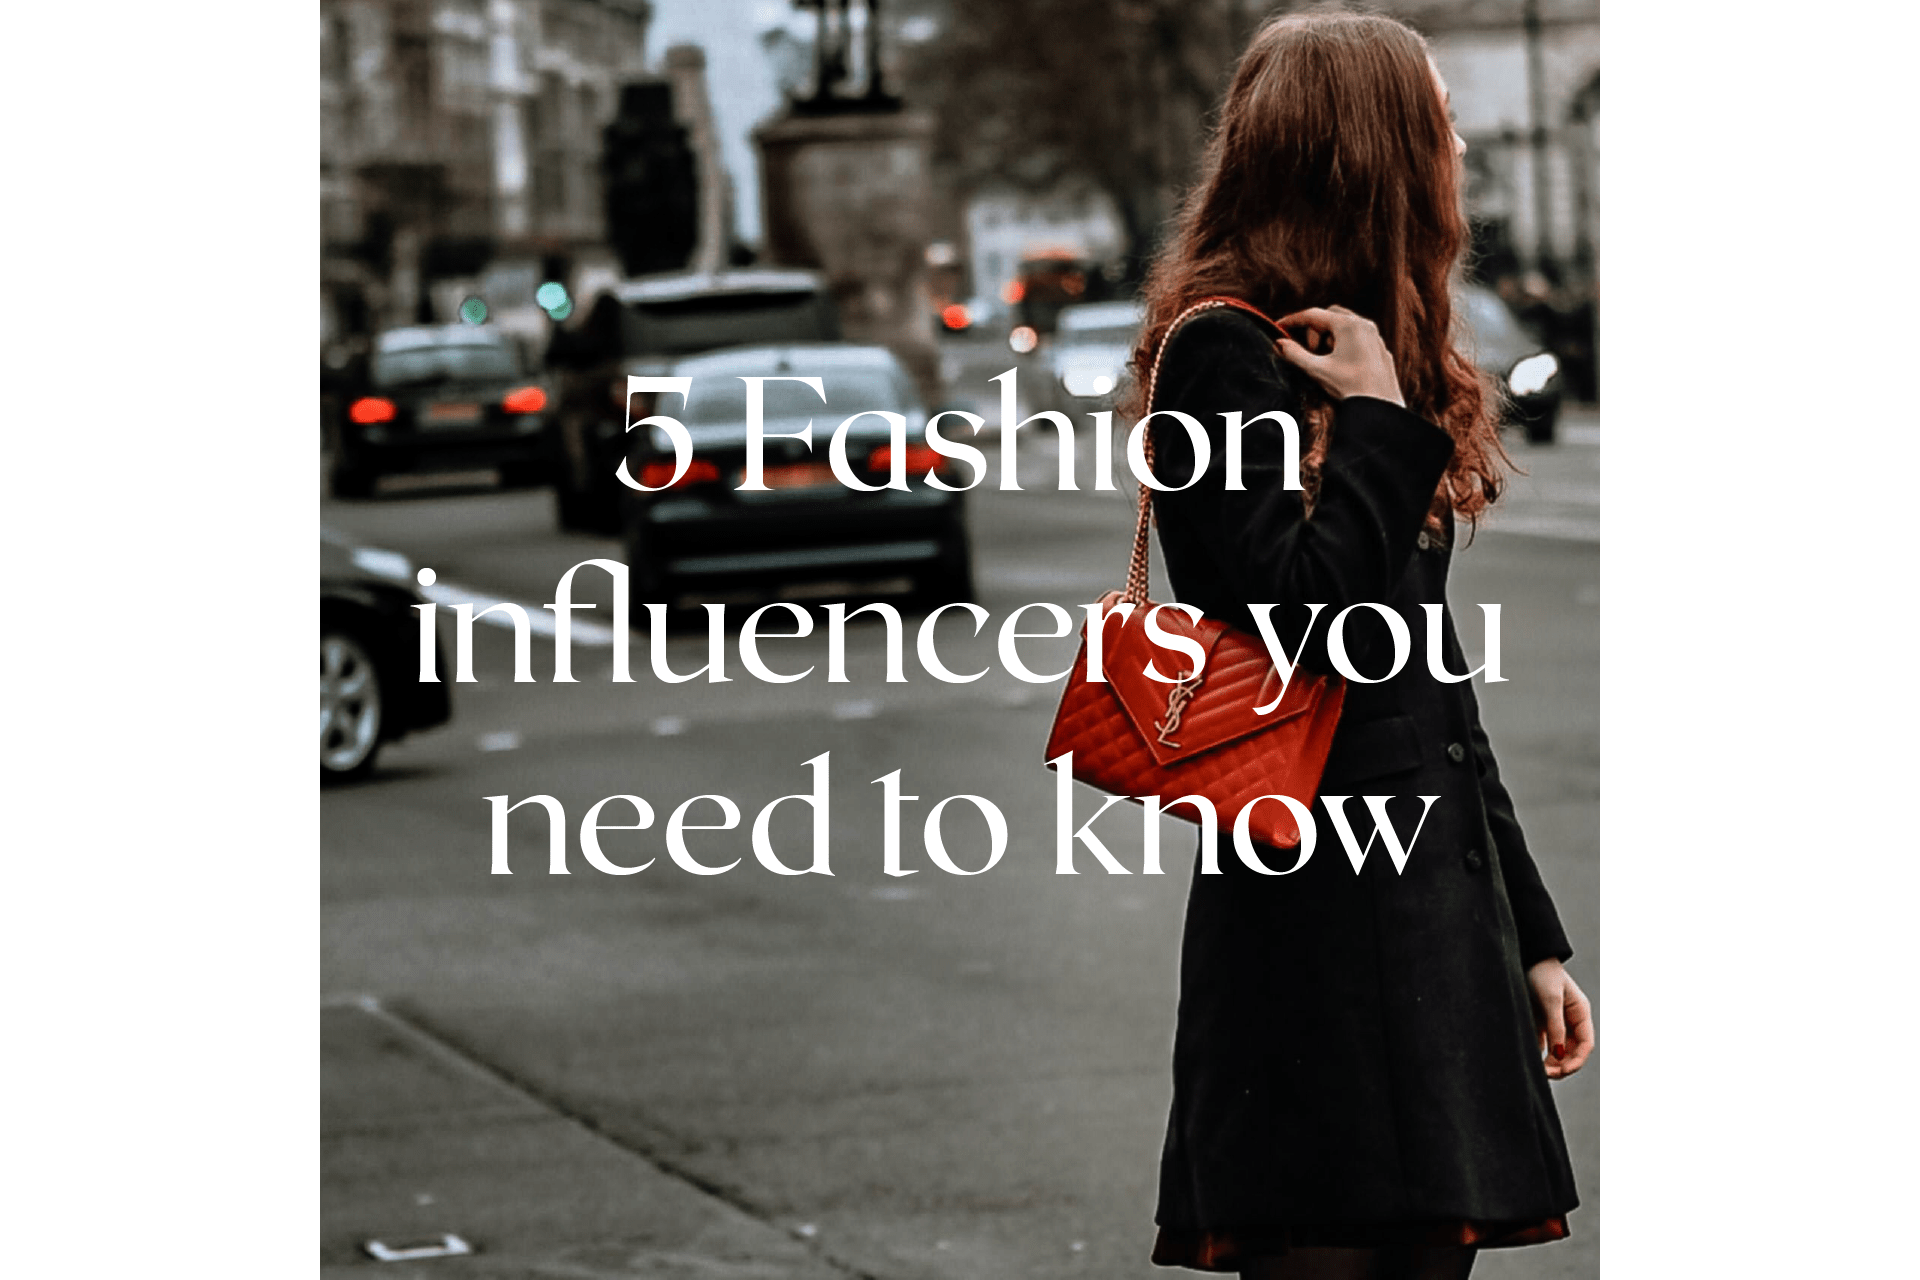 5 fashion influencers you need to know